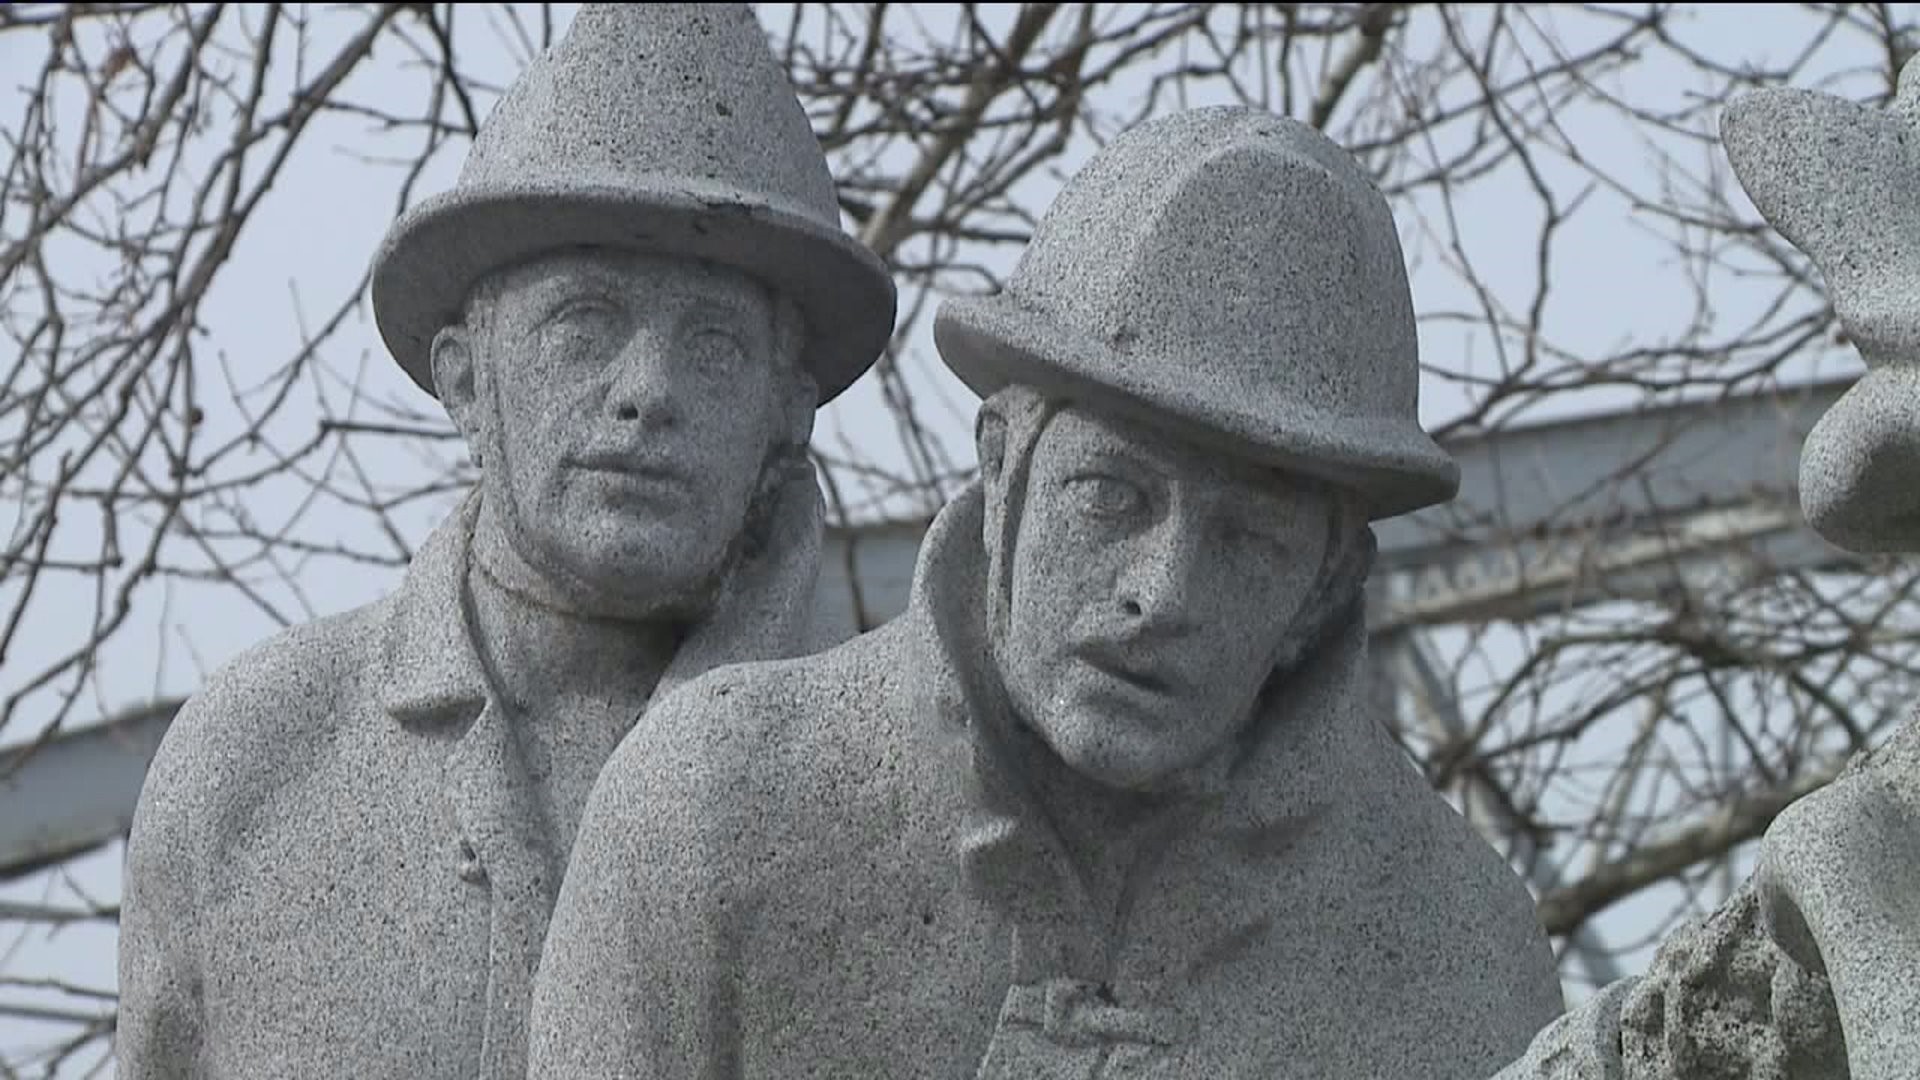 25 Year Anniversary of Double Fatal Fire in Pittston: Remembering Two Firefighters Lost